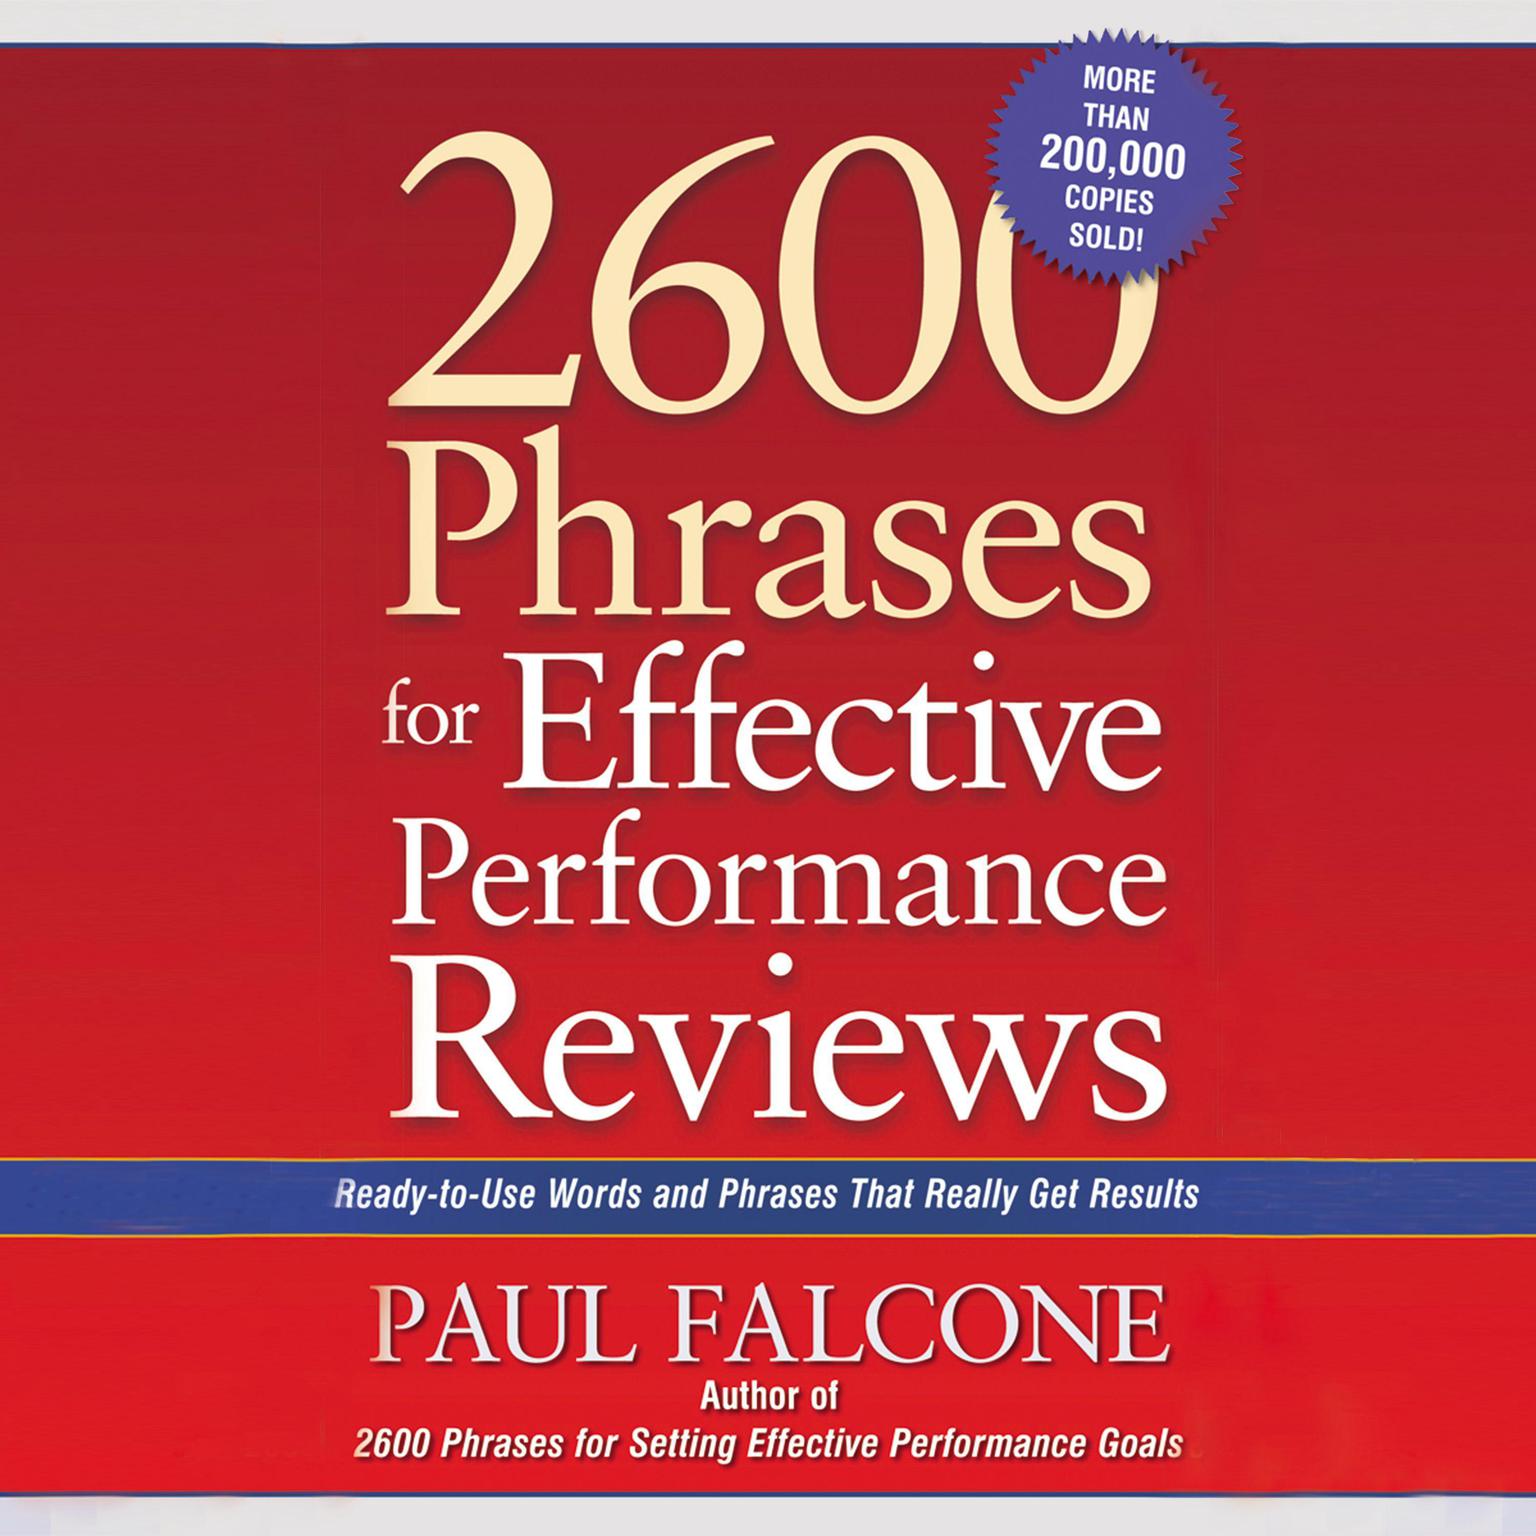 2600 Phrases for Effective Performance Reviews: Ready-to-Use Words and Phrases That Really Get Results Audiobook, by Paul Falcone